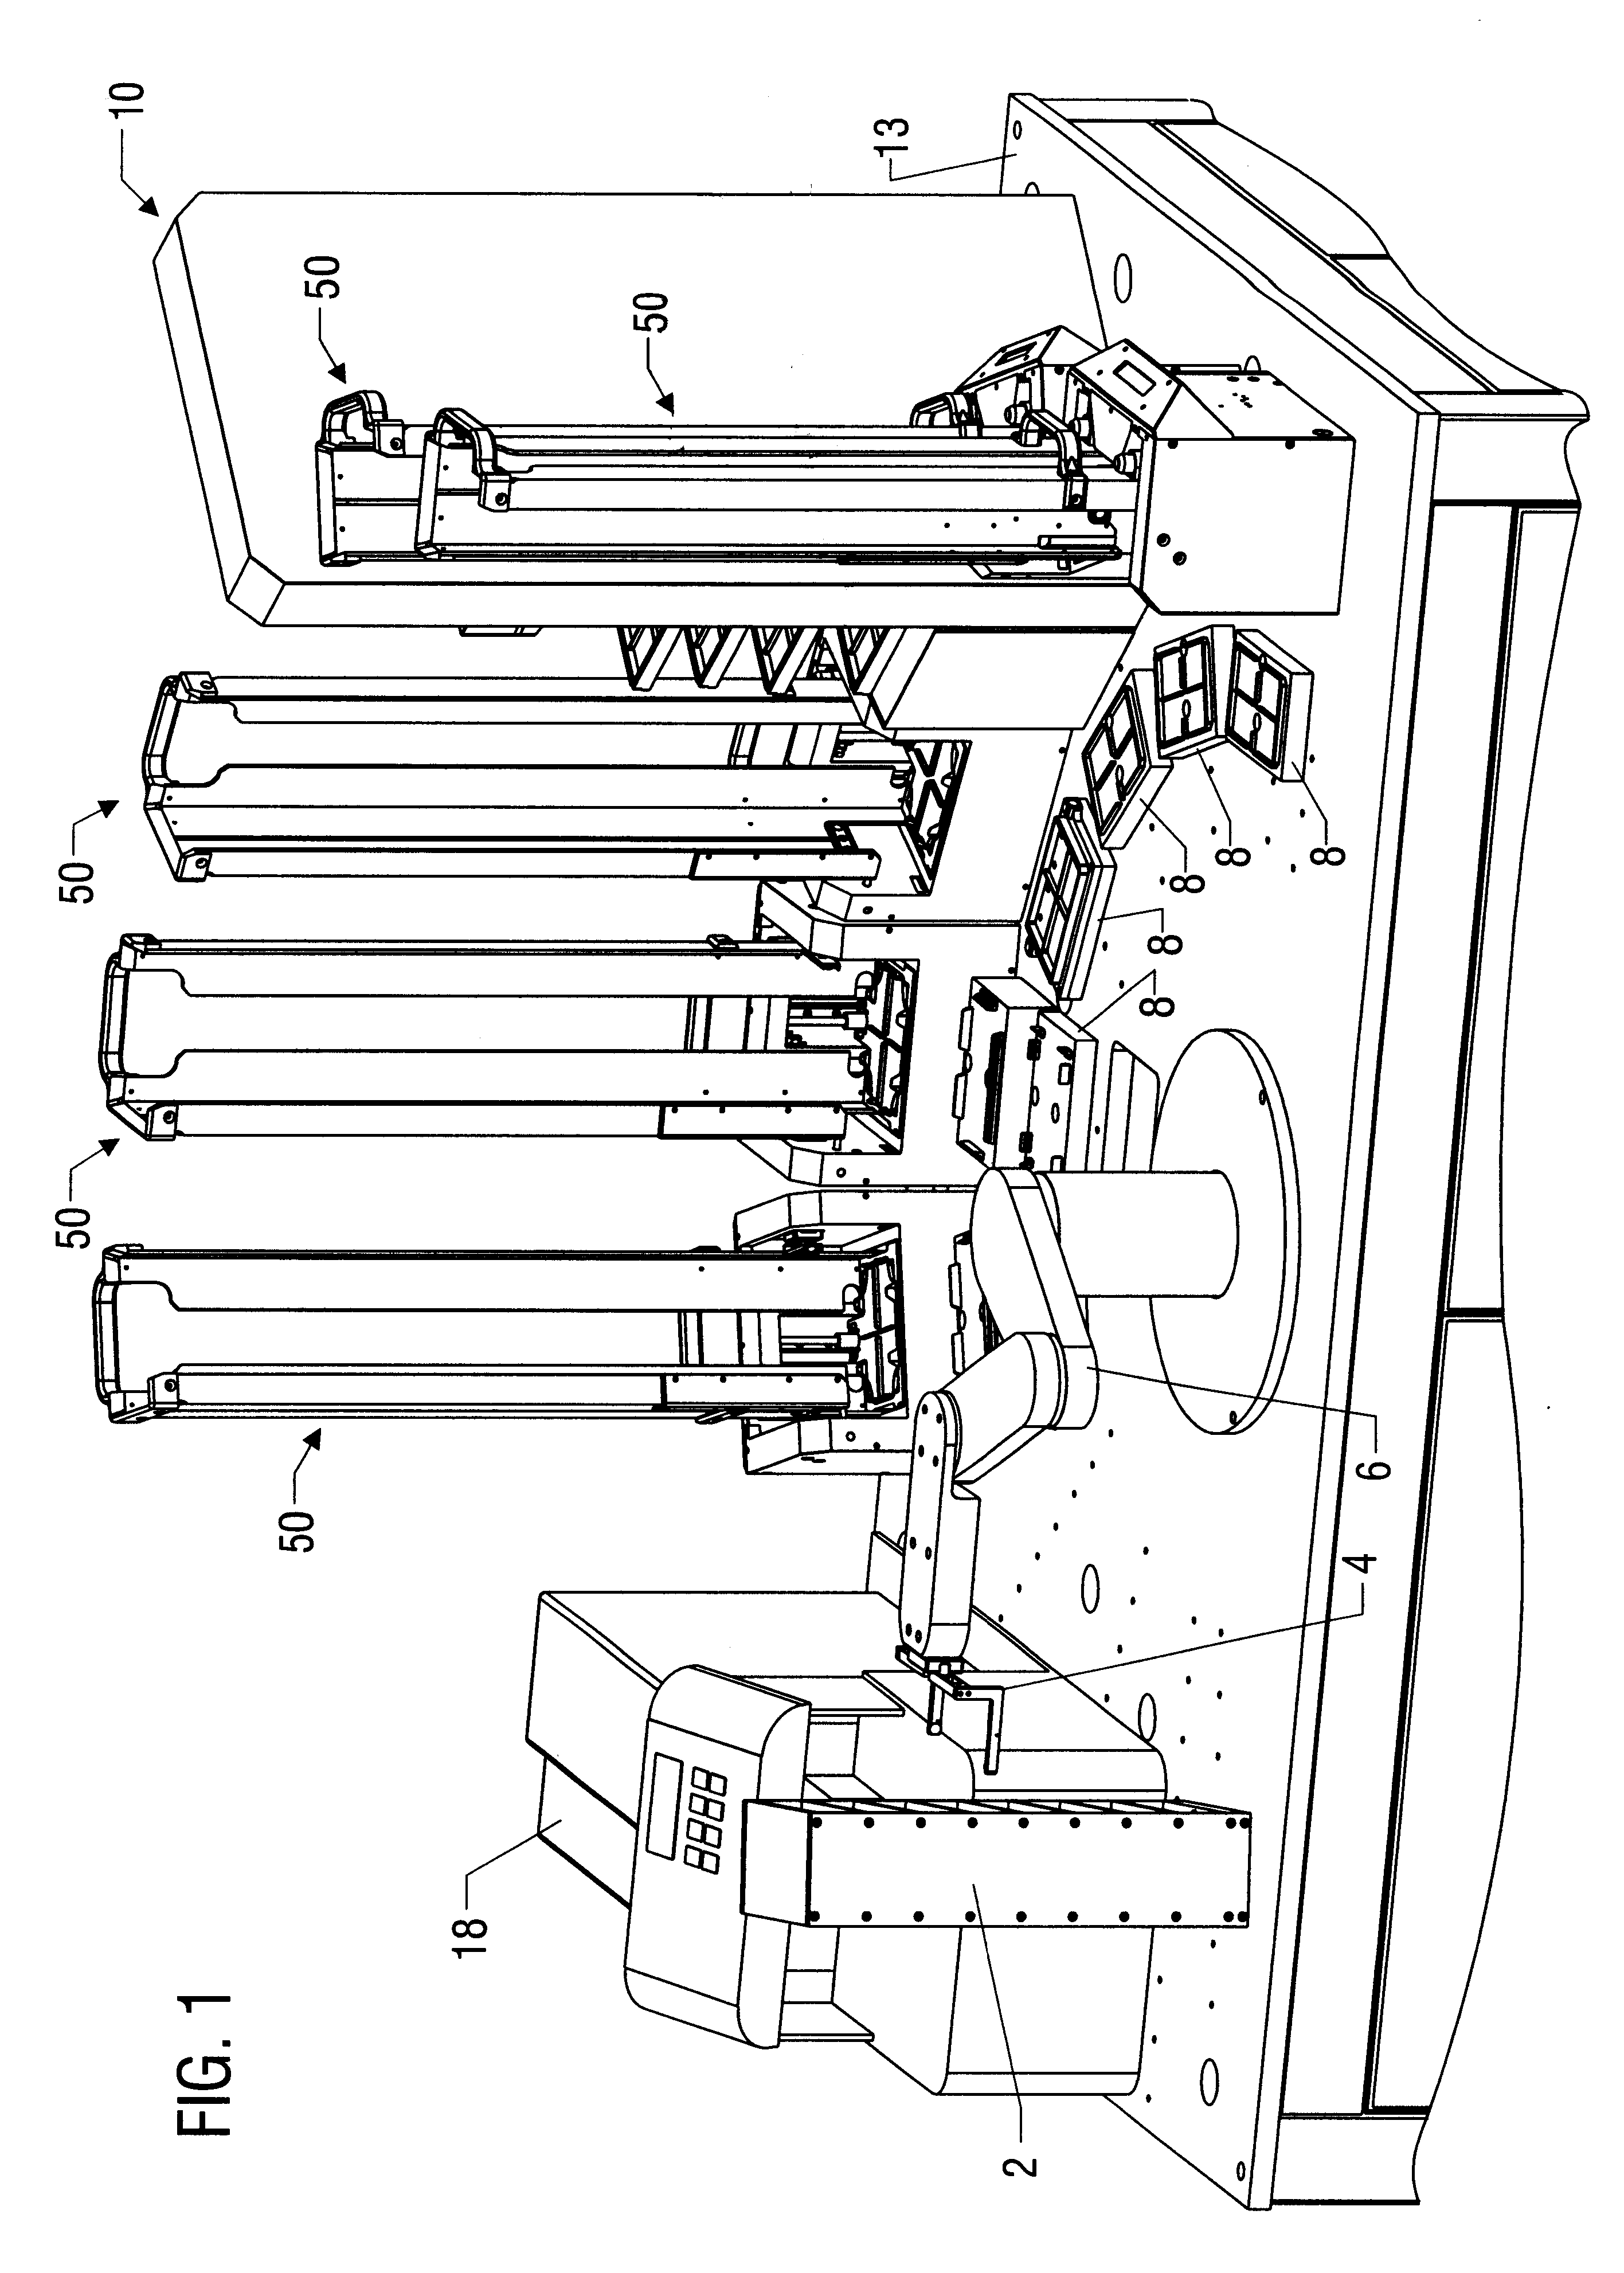 Pipetting station apparatus